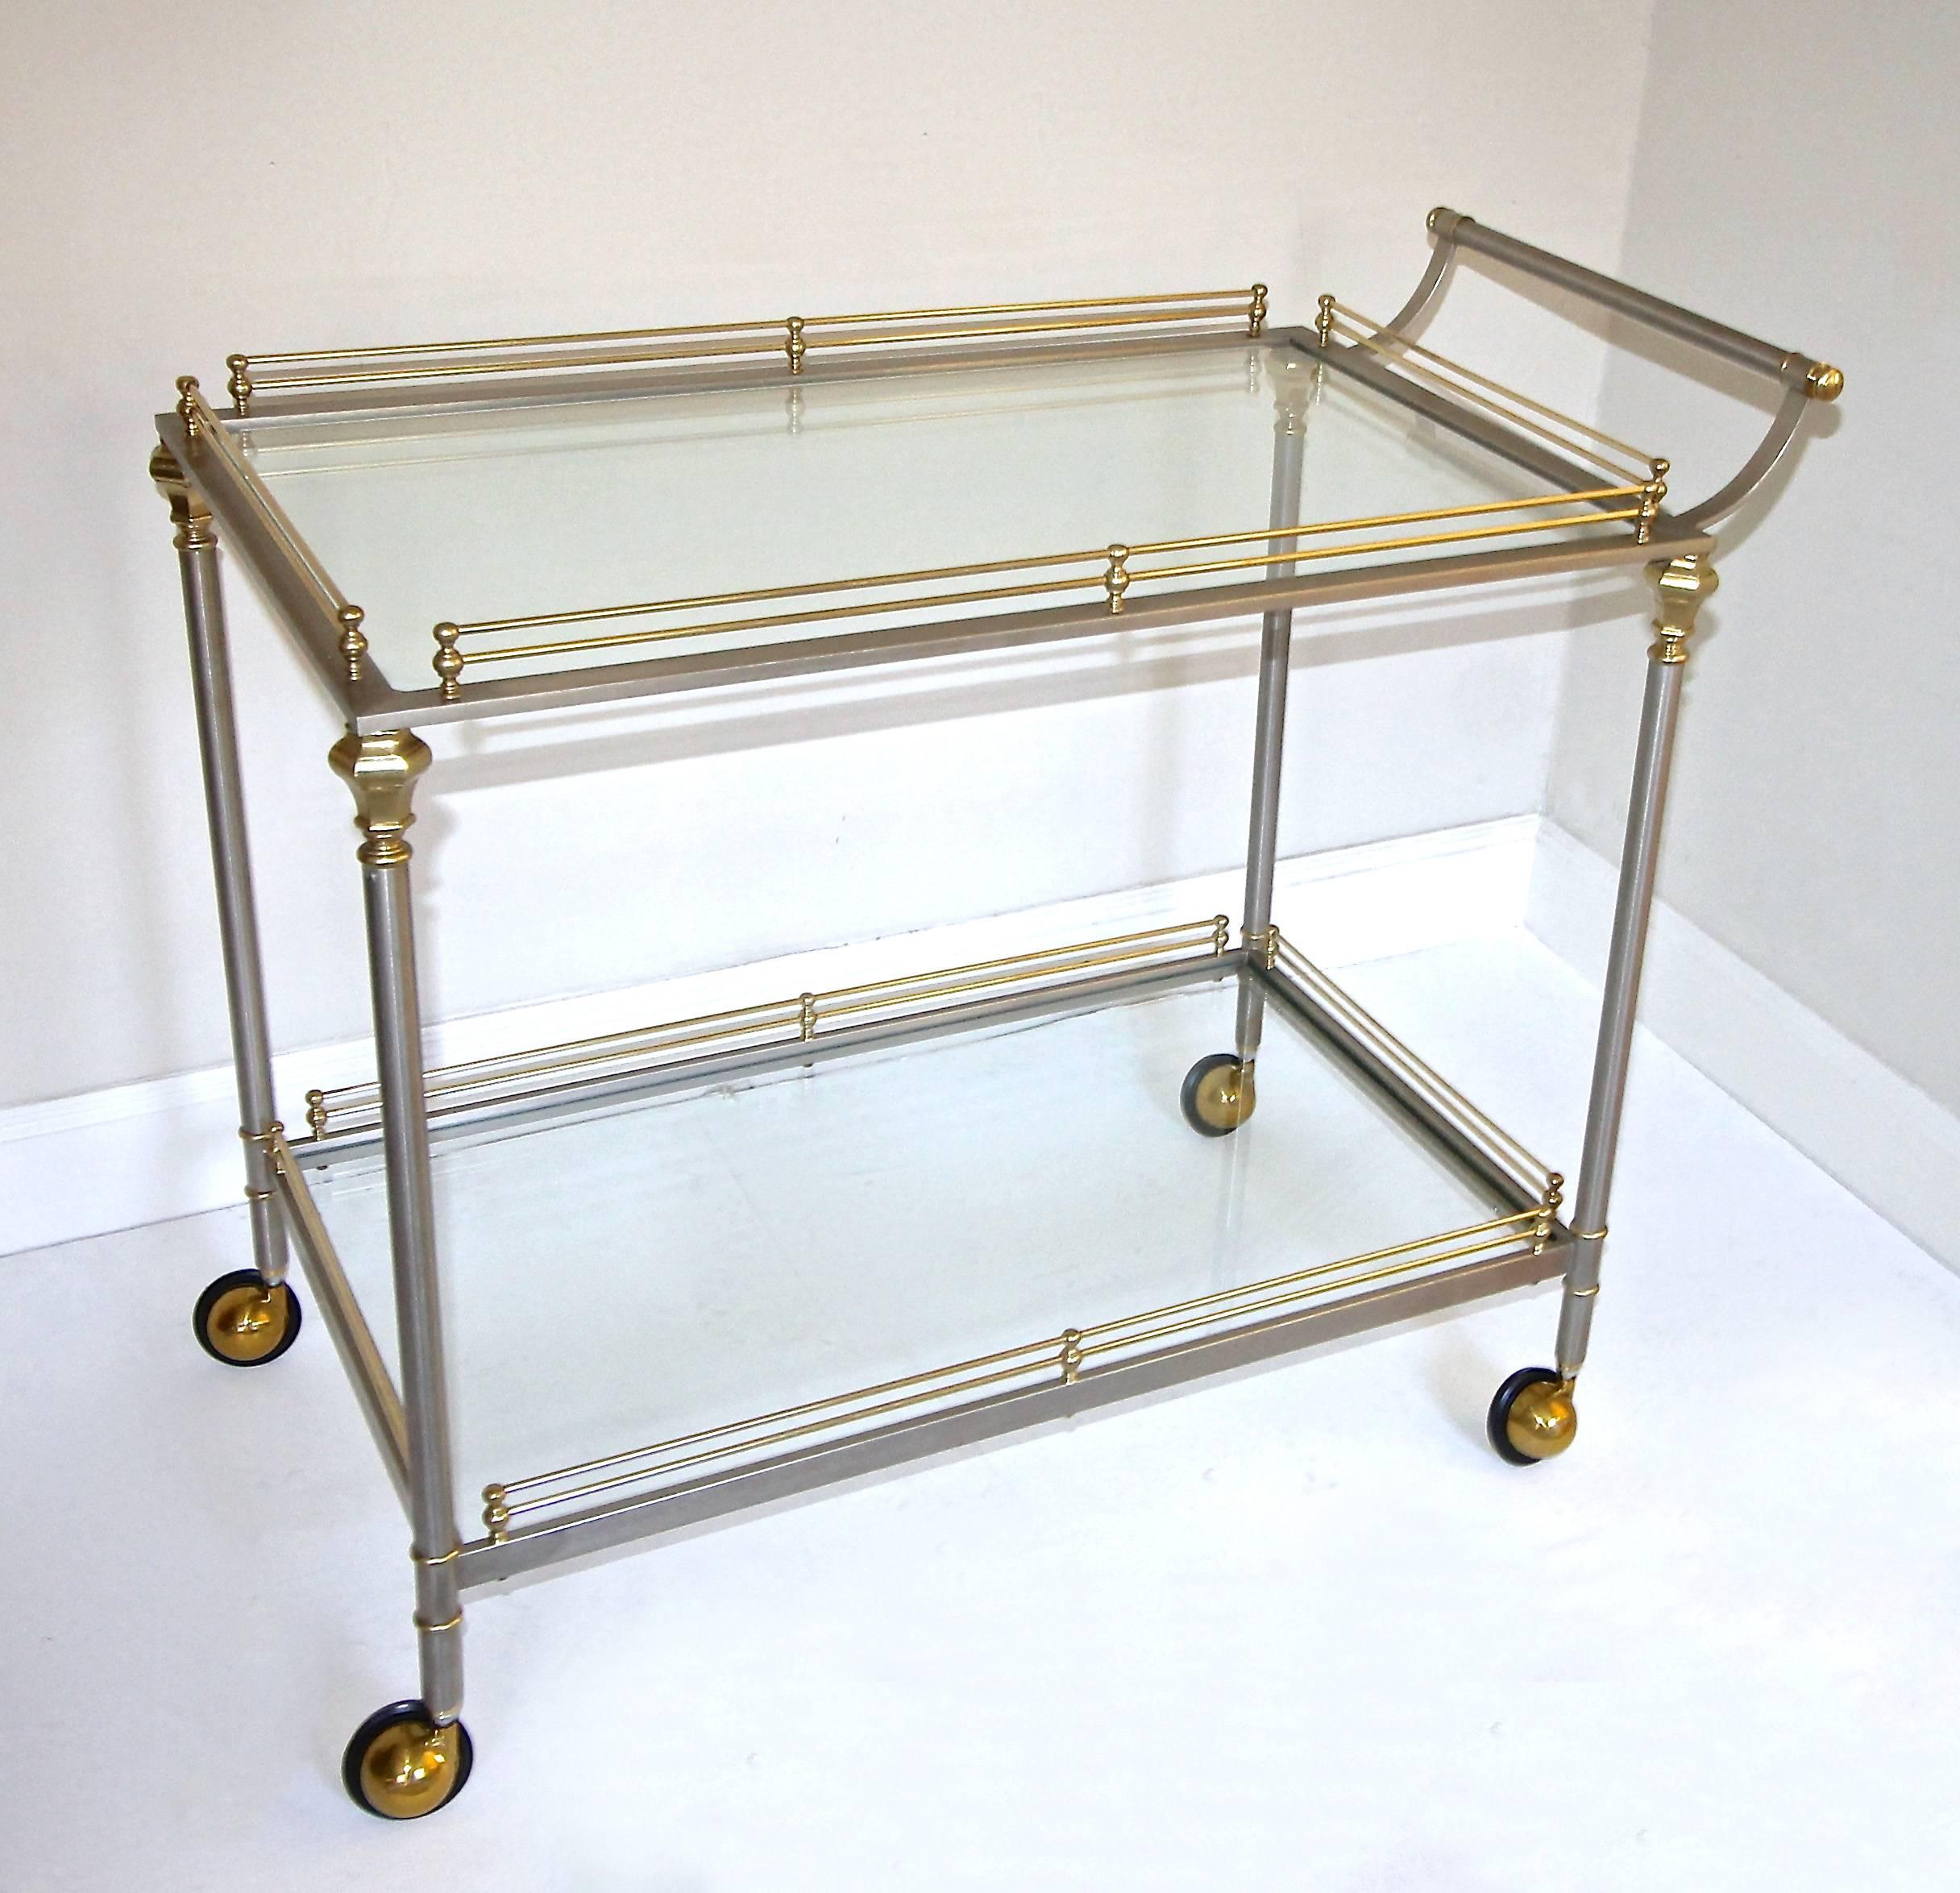 A well crafted larger scale solid brass and brushed steel Italian bar or tea cart, with two-tier glass shelves, gallery rail and caster wheels. 

Measures: Height to top shelf 29", height to top of handle 31".